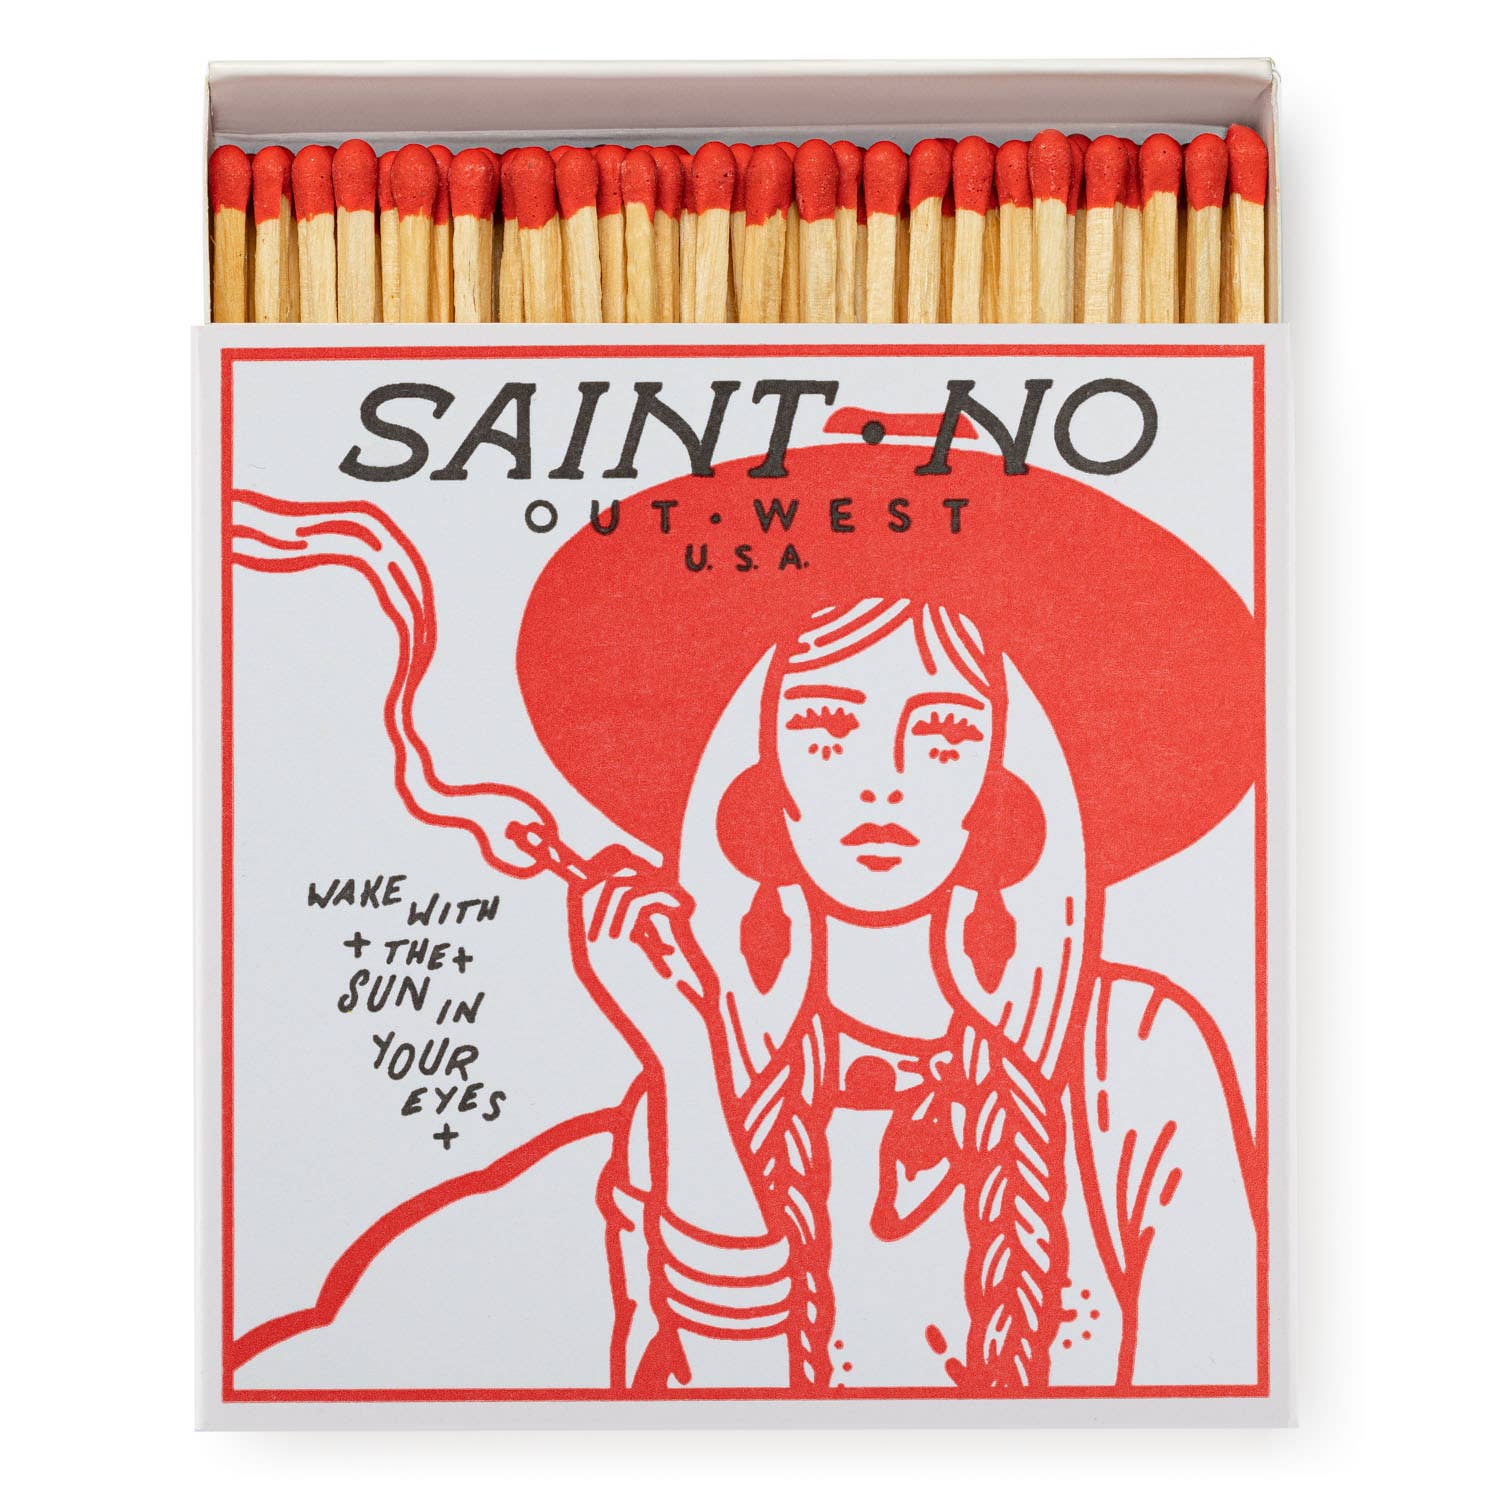 Out West RED Match Box | Saint No